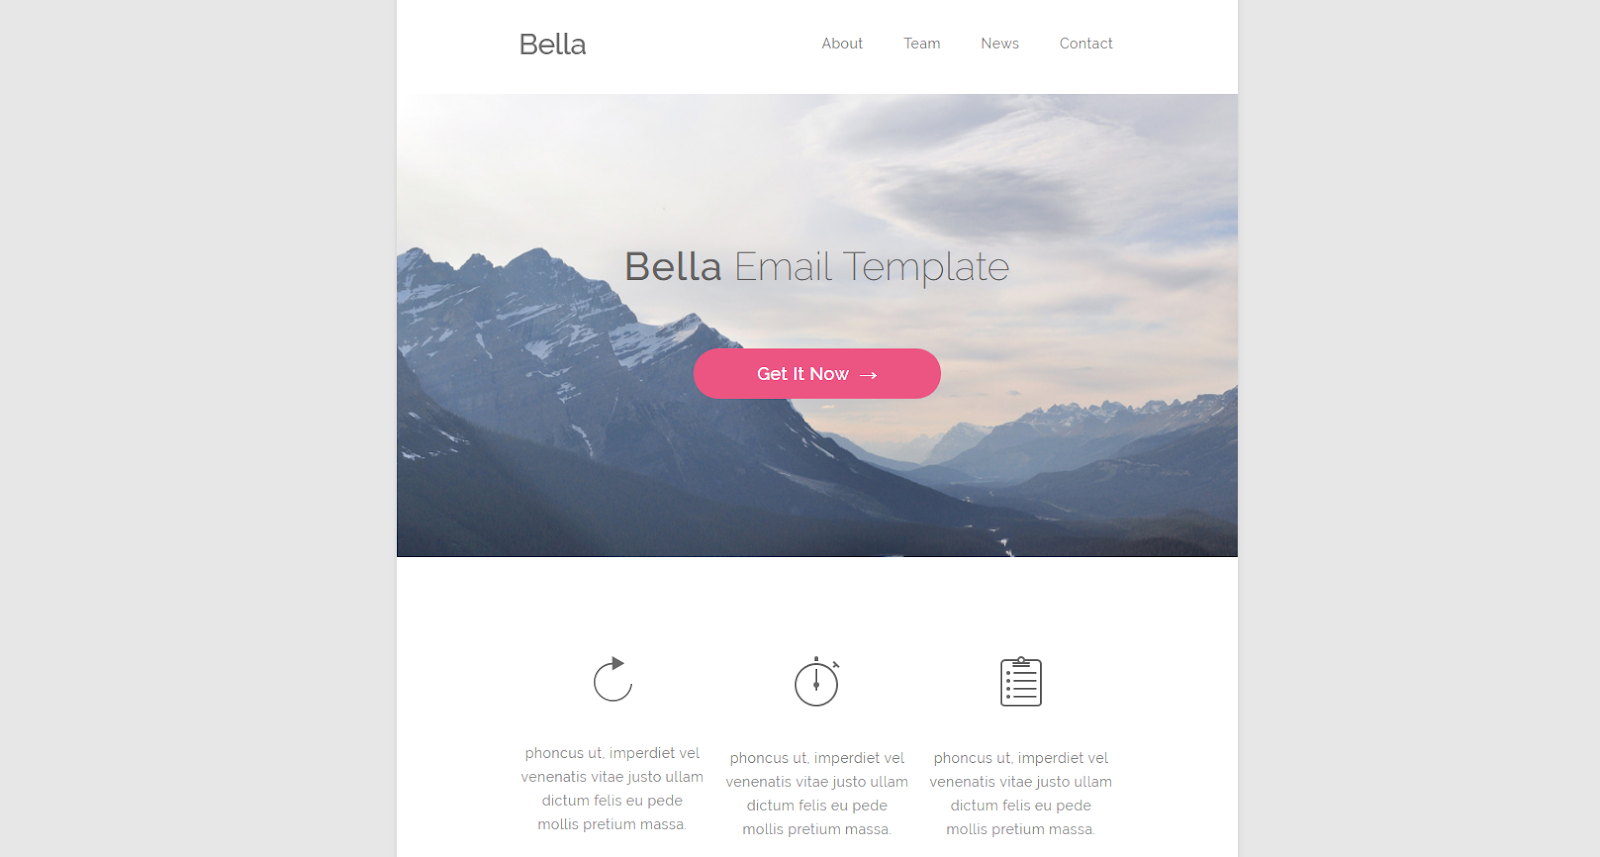 The Best Free MailChimp Templates for Bloggers - Bella